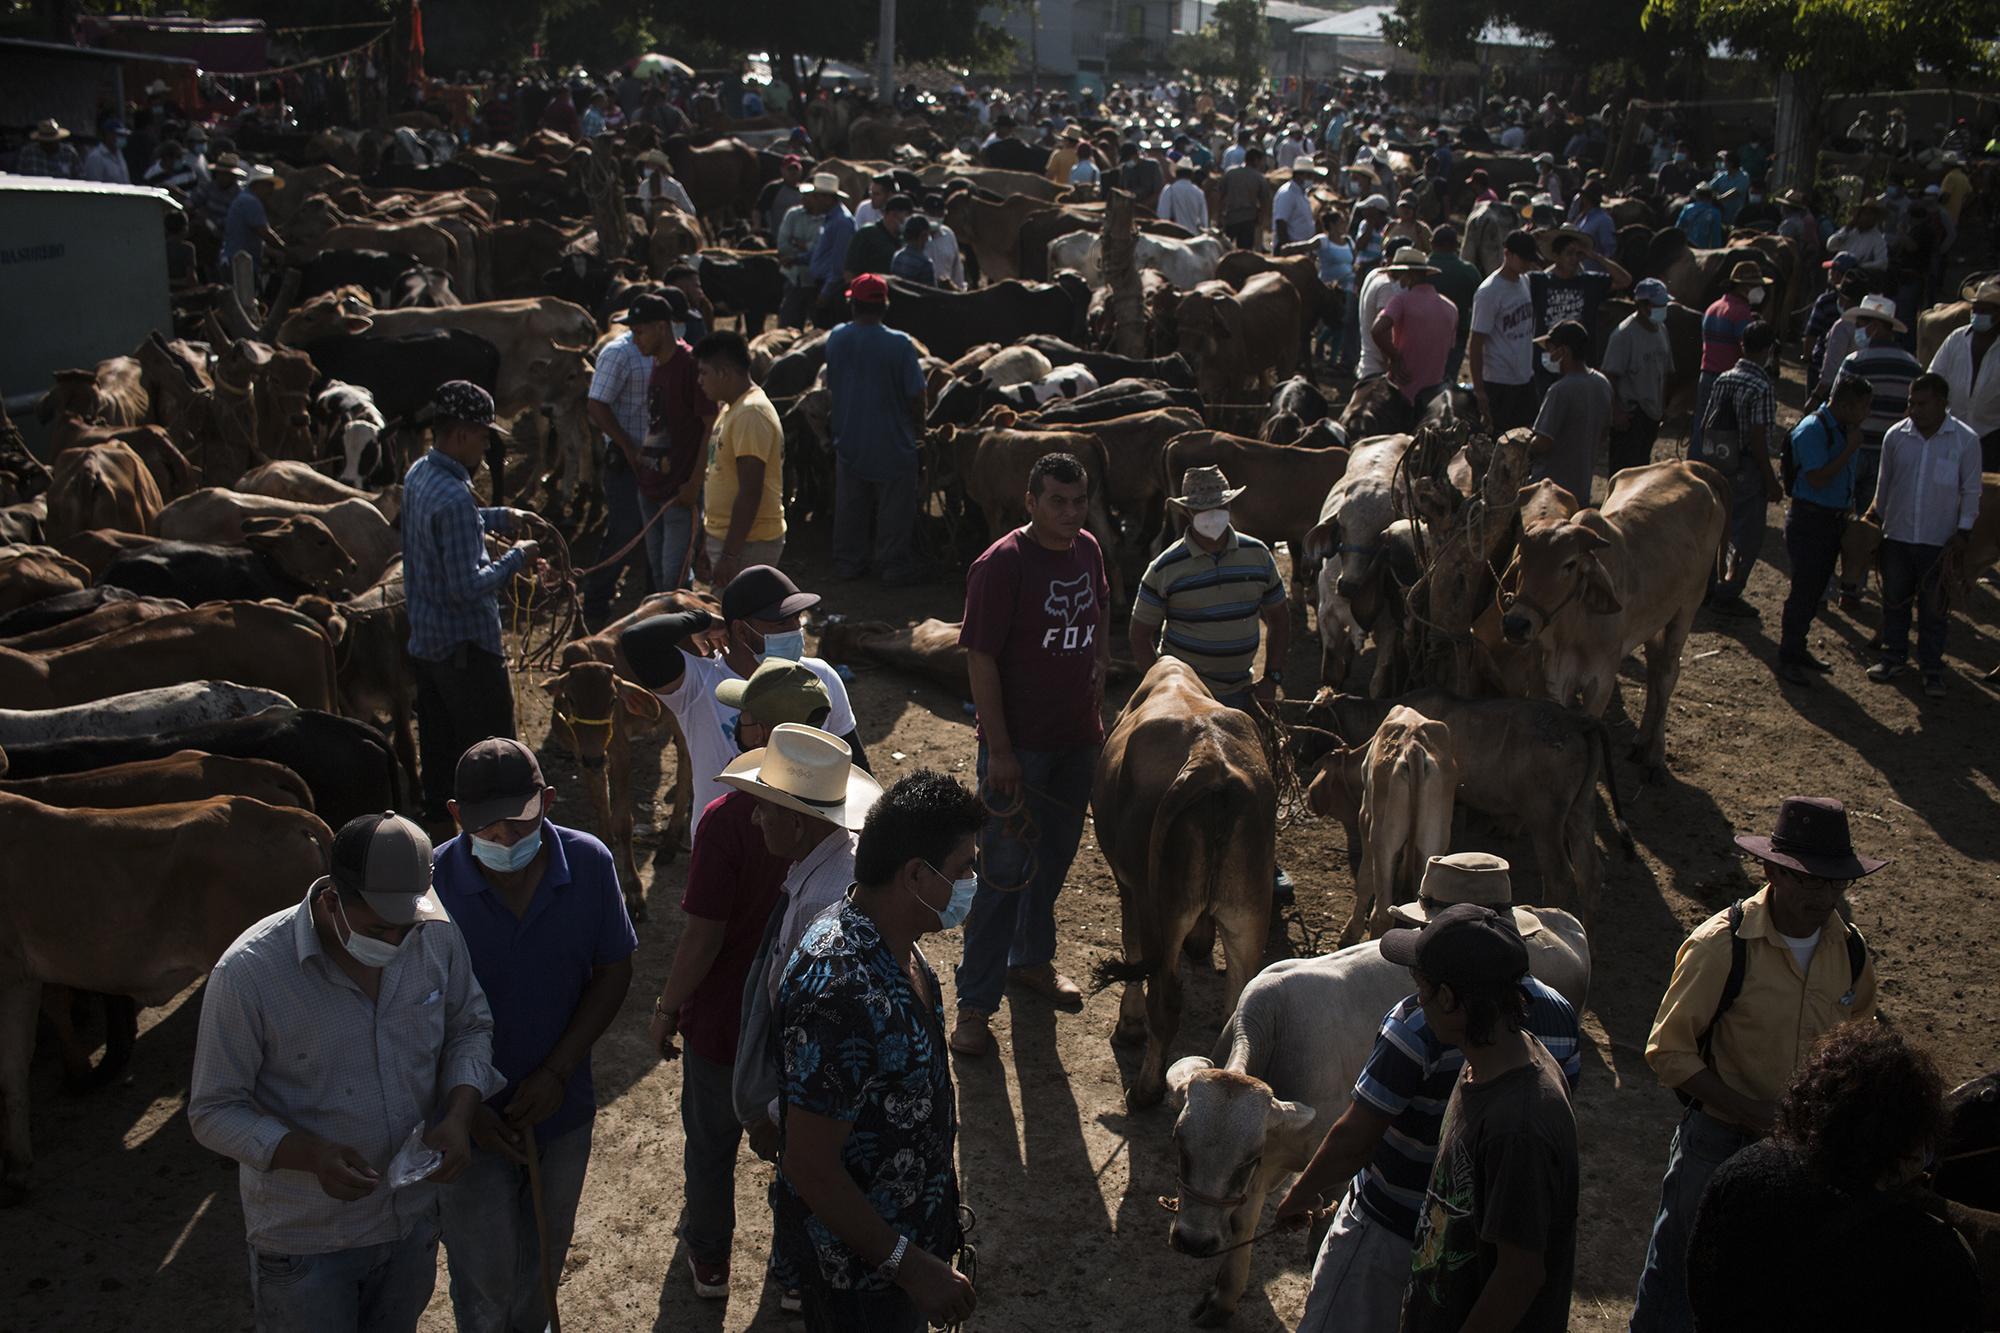 Every Saturday, starting at 6 a.m., ranchers, farmers and small vendors arrive at the municipal market in San Rafael Cedros, in the department of Cuscatlán, to sell their pigs, livestock, chickens, dogs, goats, and even show horses. Some come in trucks full of animals; others, in public transportation, and some by foot.